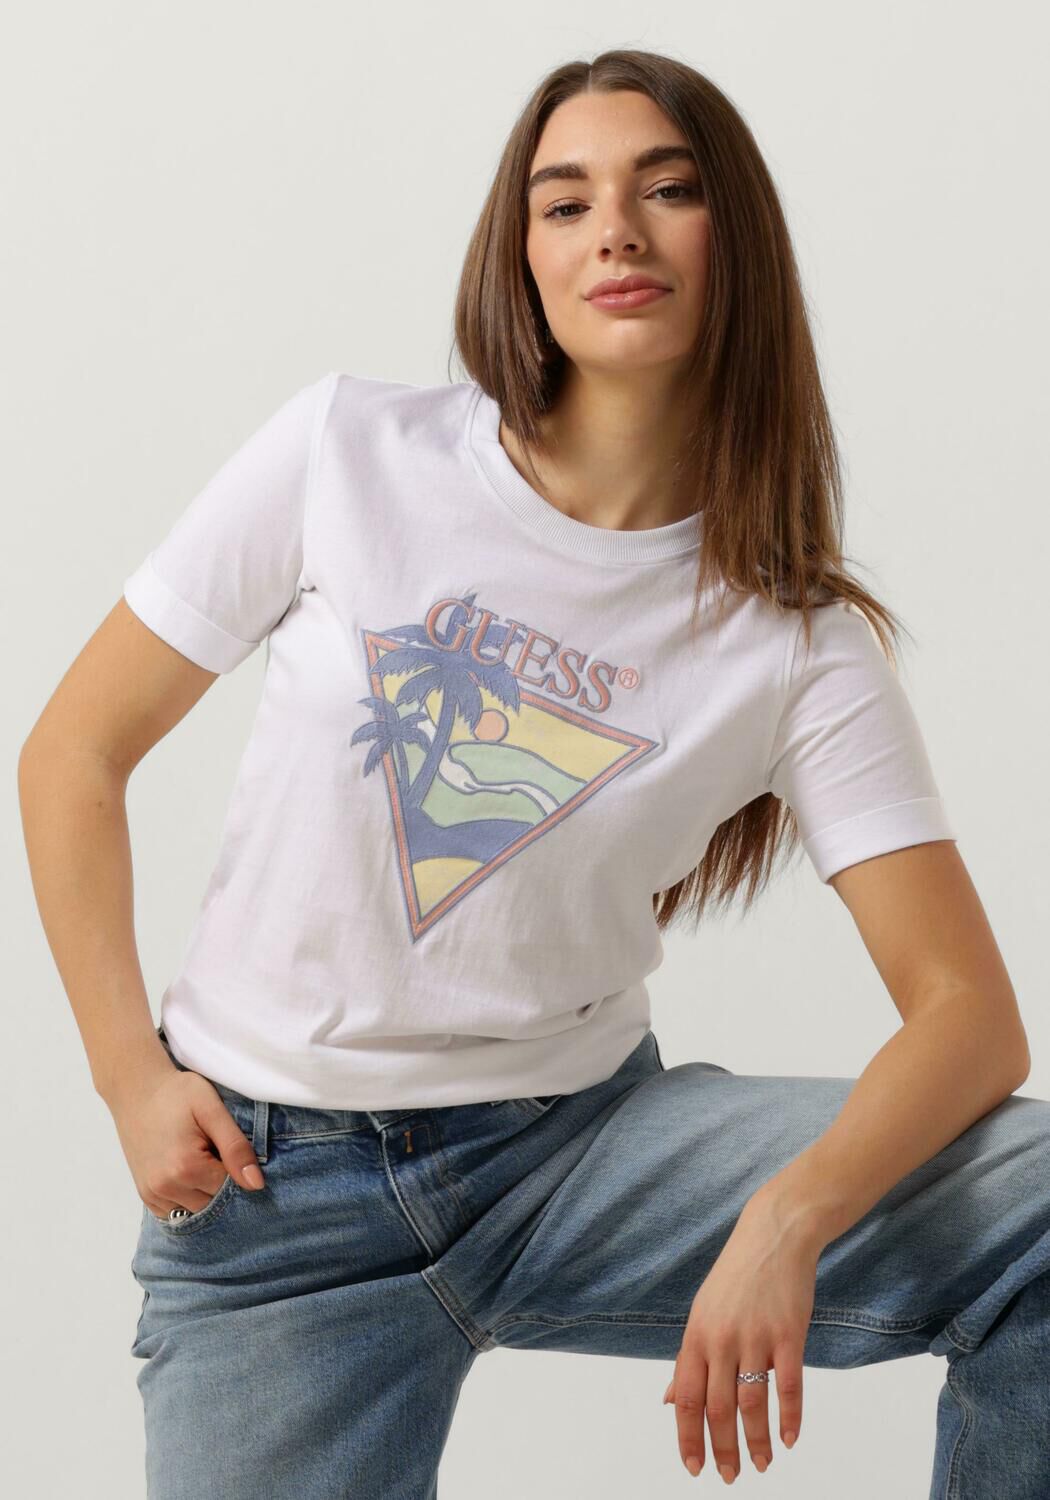 GUESS Dames Tops & T-shirts Ss Rn Beach Triangle Tee Wit